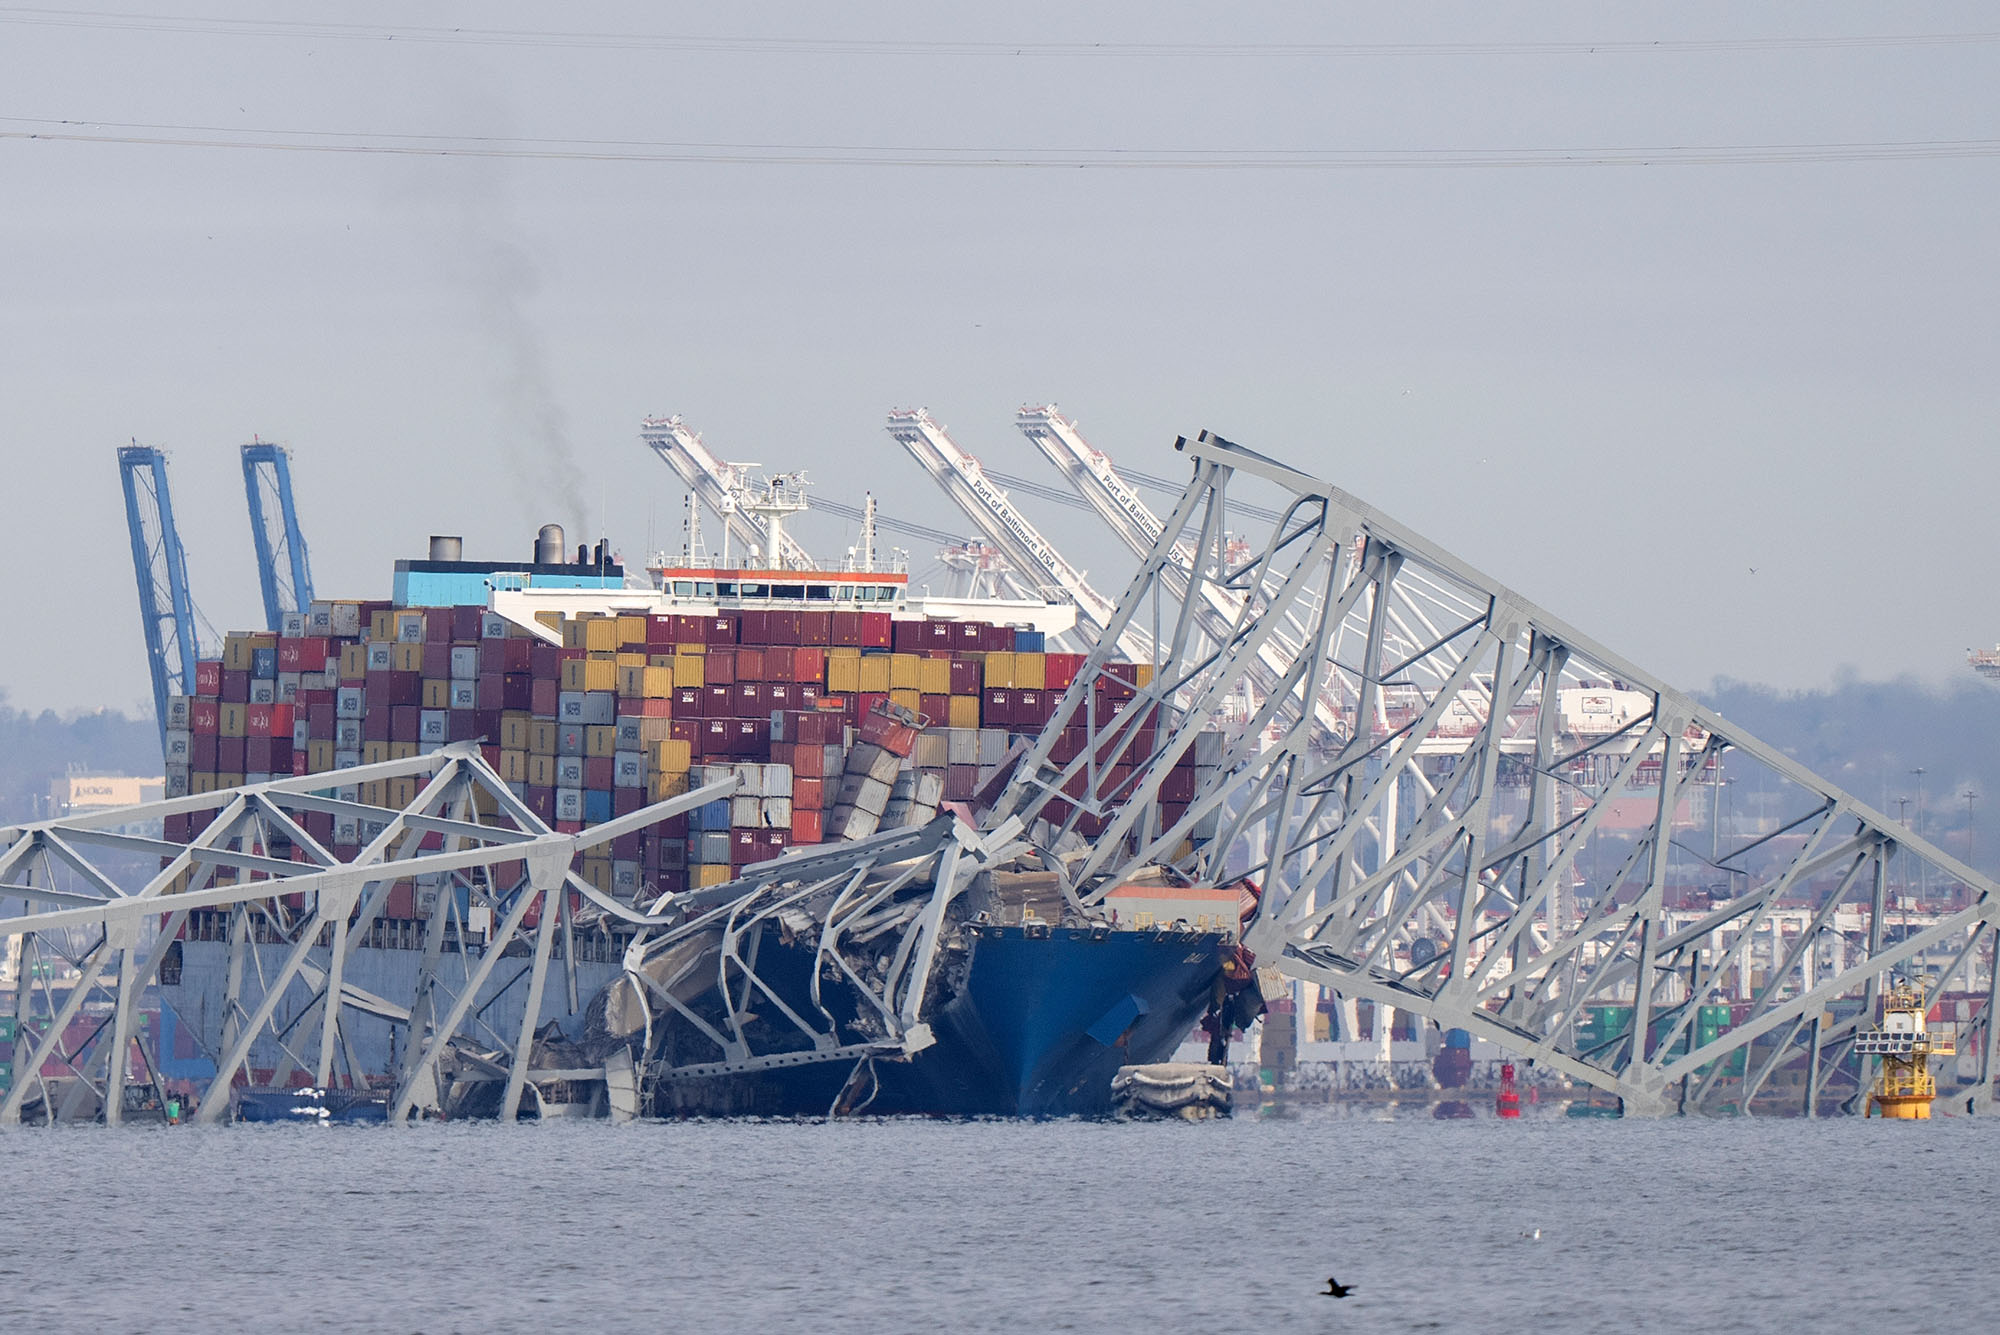 Photo: An image of a container ship hitting the Francis Scott Key Bridge